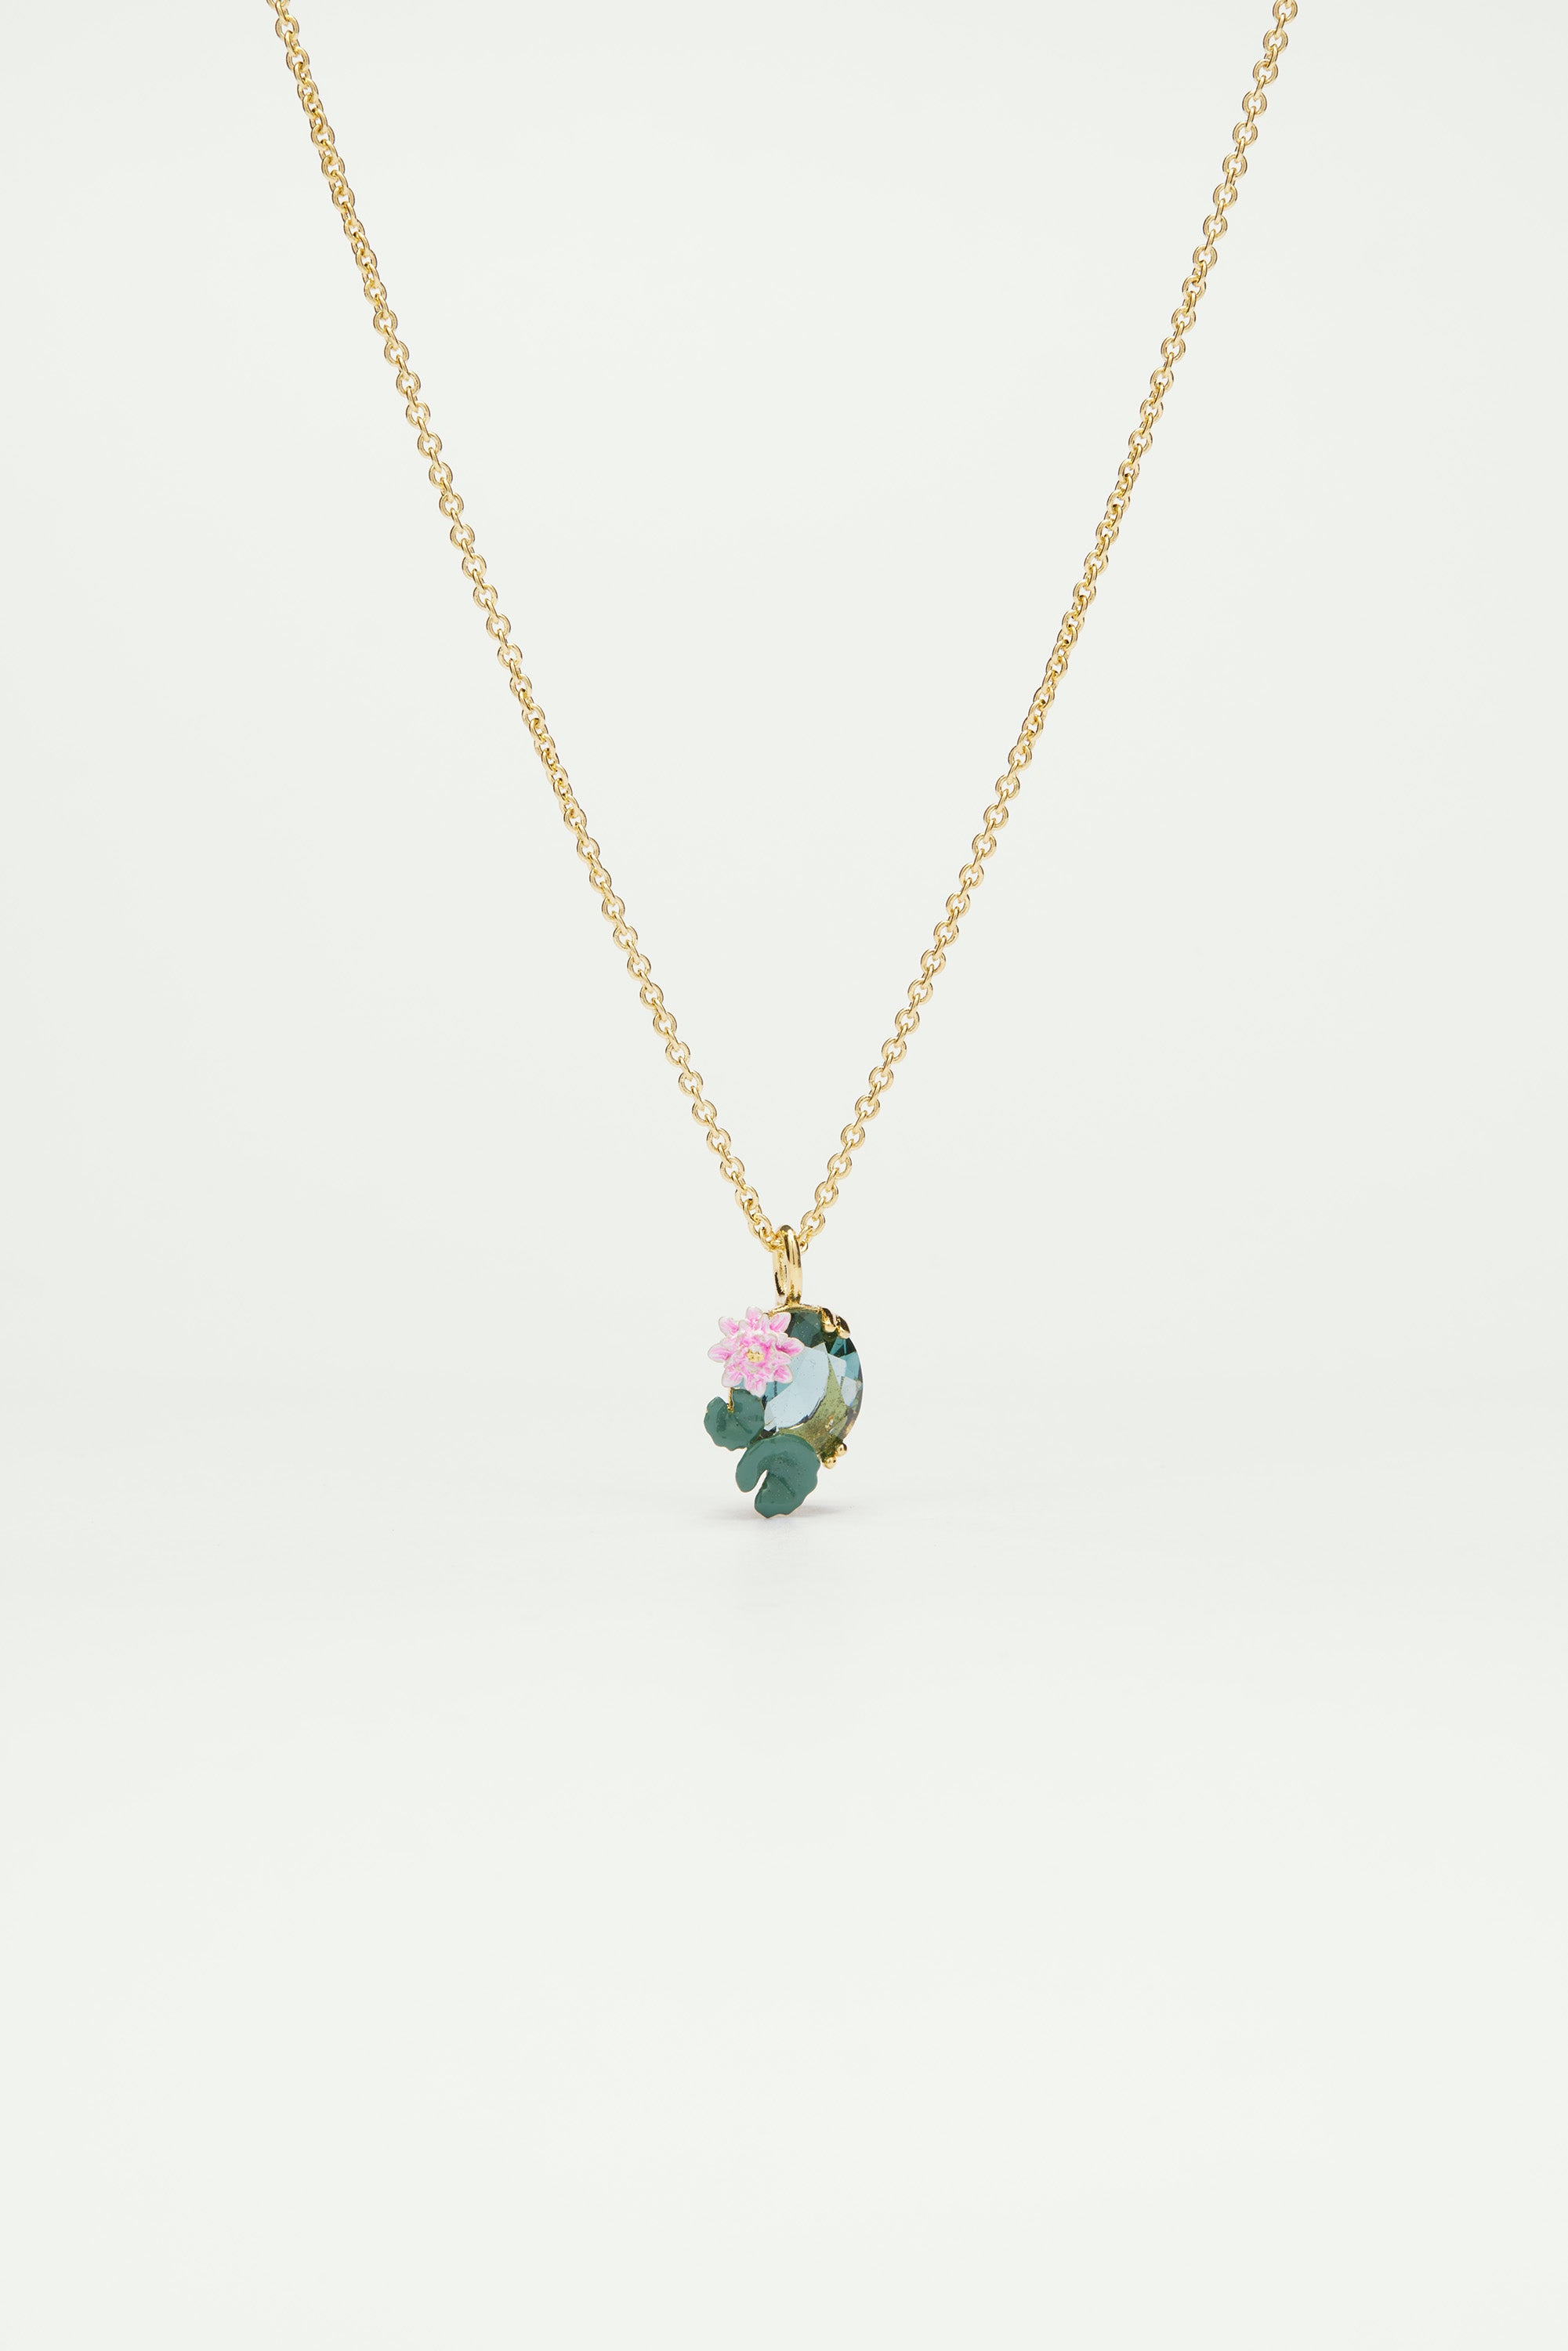 Lotus flower and blue stone pendant necklace